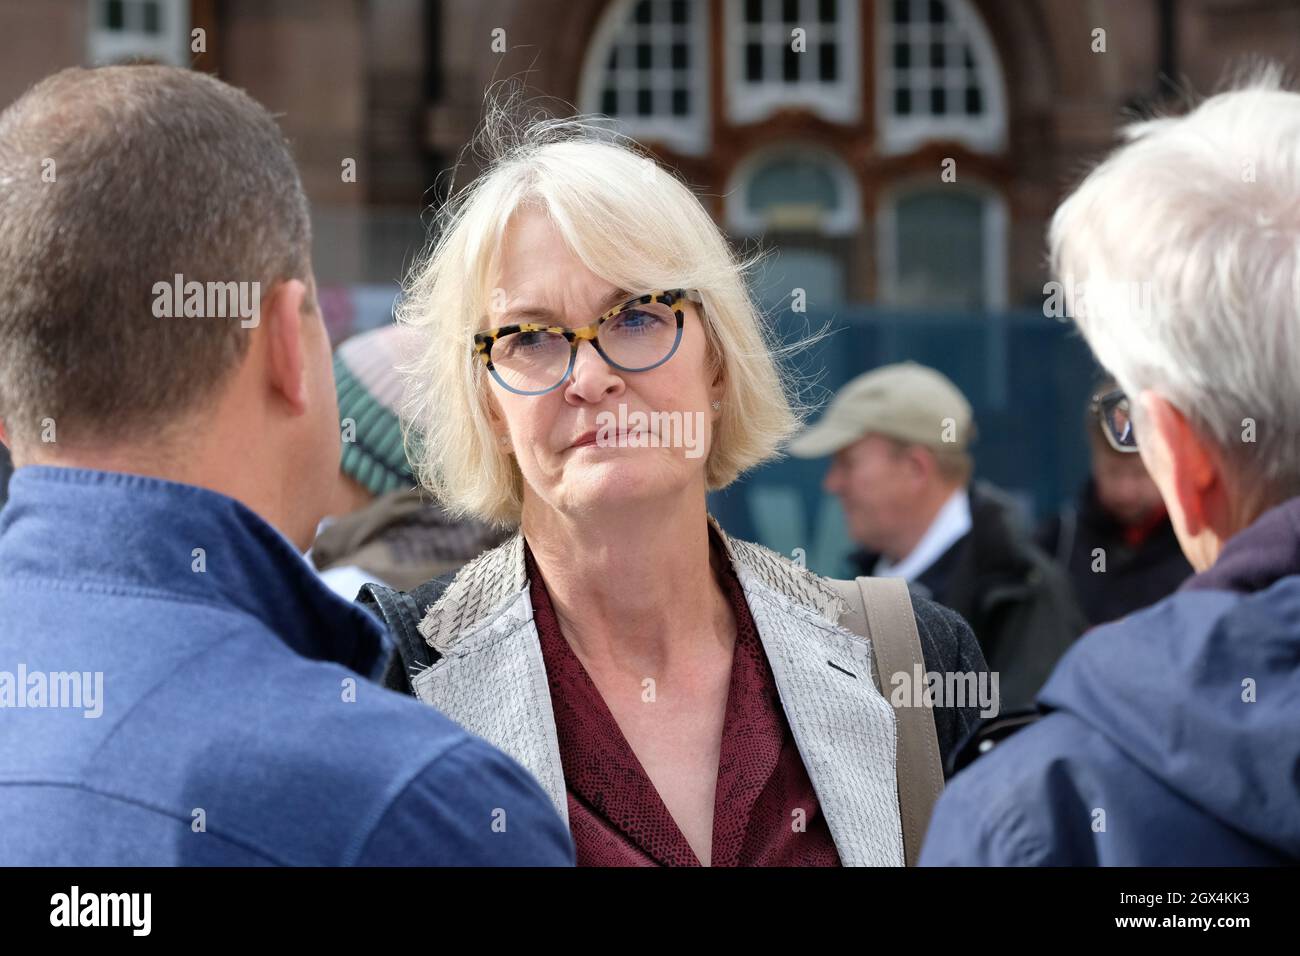 Manchester, UK – Monday 4th October 2021 – Former Conservative MP Margot James talking to pig producers outside the Conservative Party Conference in Manchester. Photo Steven May / Alamy Live News Stock Photo